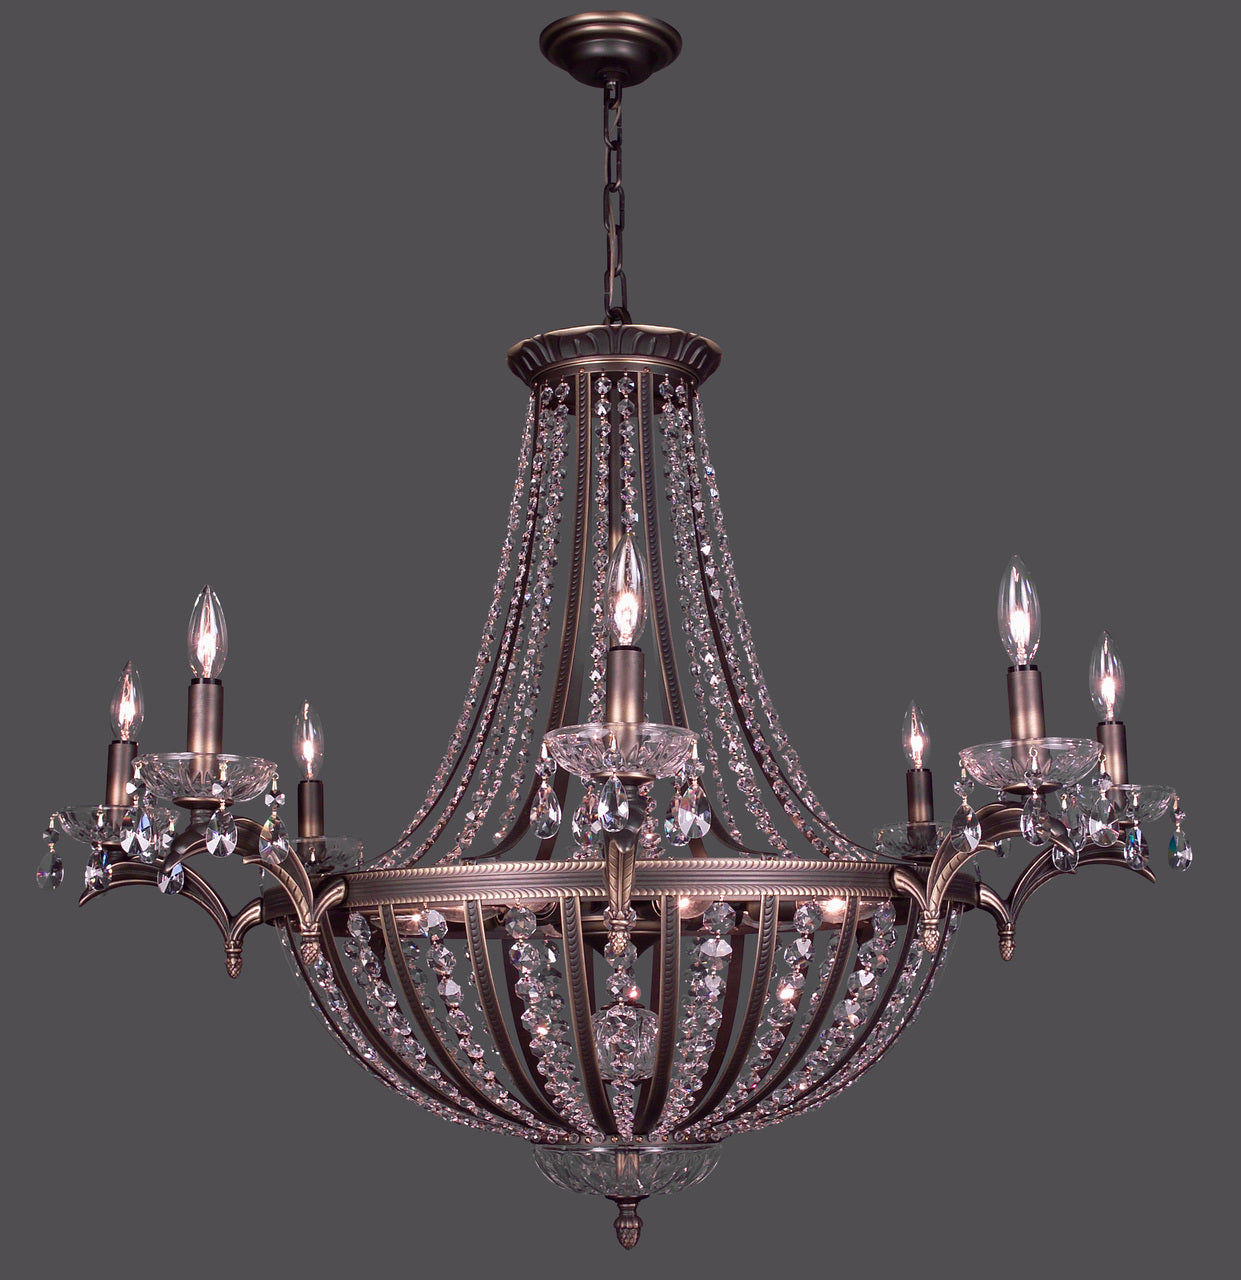 Classic Lighting 1928 RB CP Terragona Crystal Chandelier in Roman Bronze (Imported from Spain)